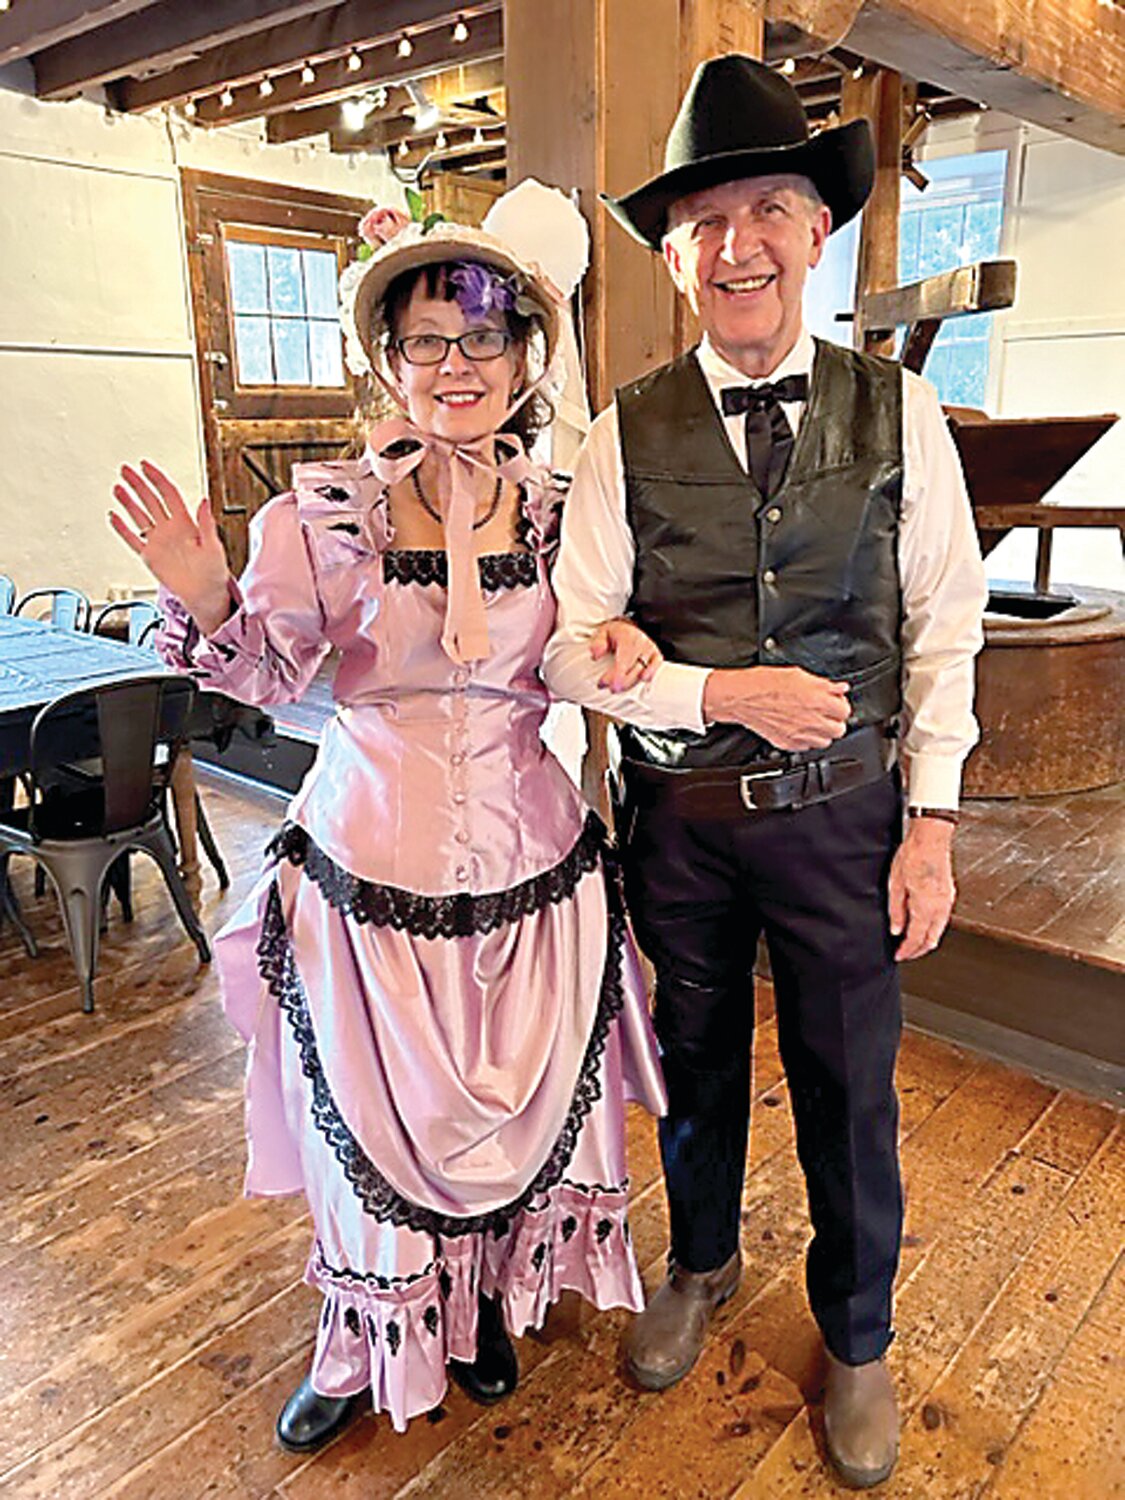 Hostess Geri Crilley Raymond and Jim Guerra as characters from “High Noon.”